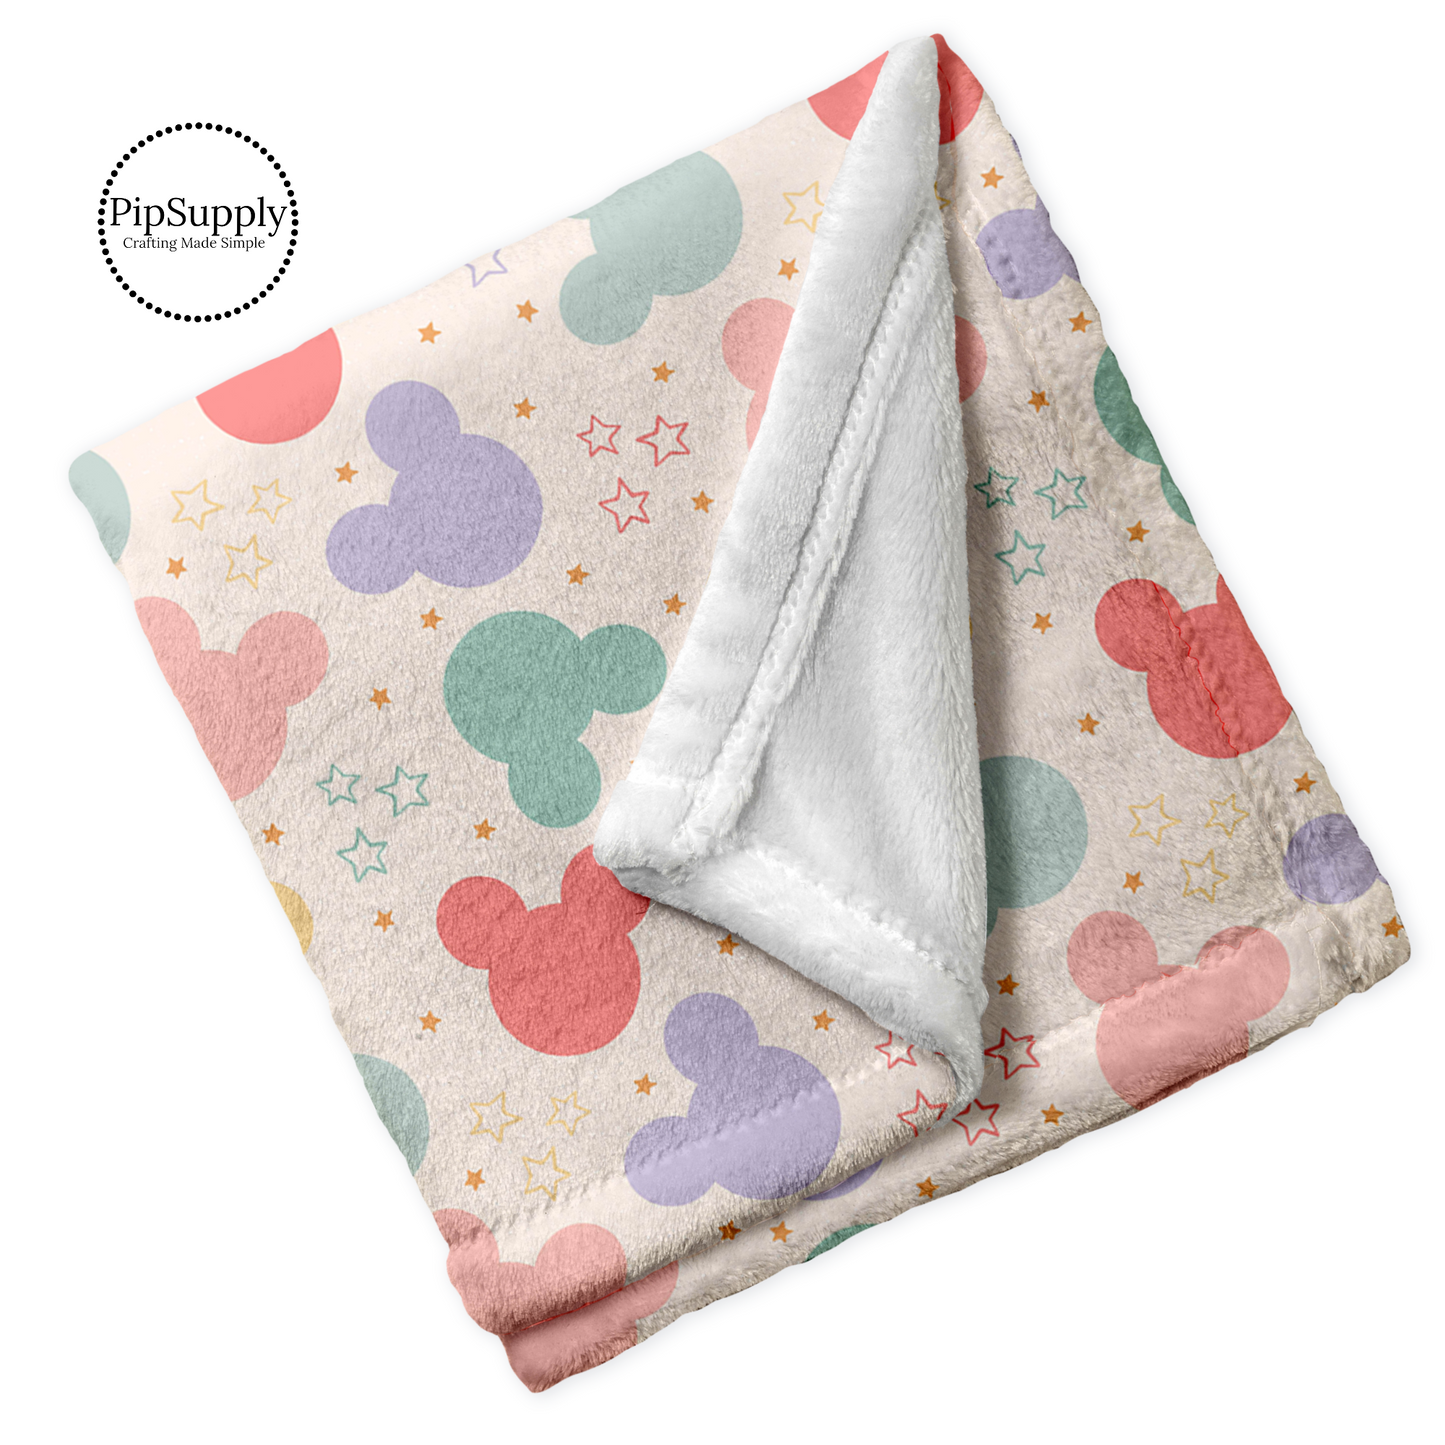 Soft minky blanket with magical stars and pastel mouse ear pattern.